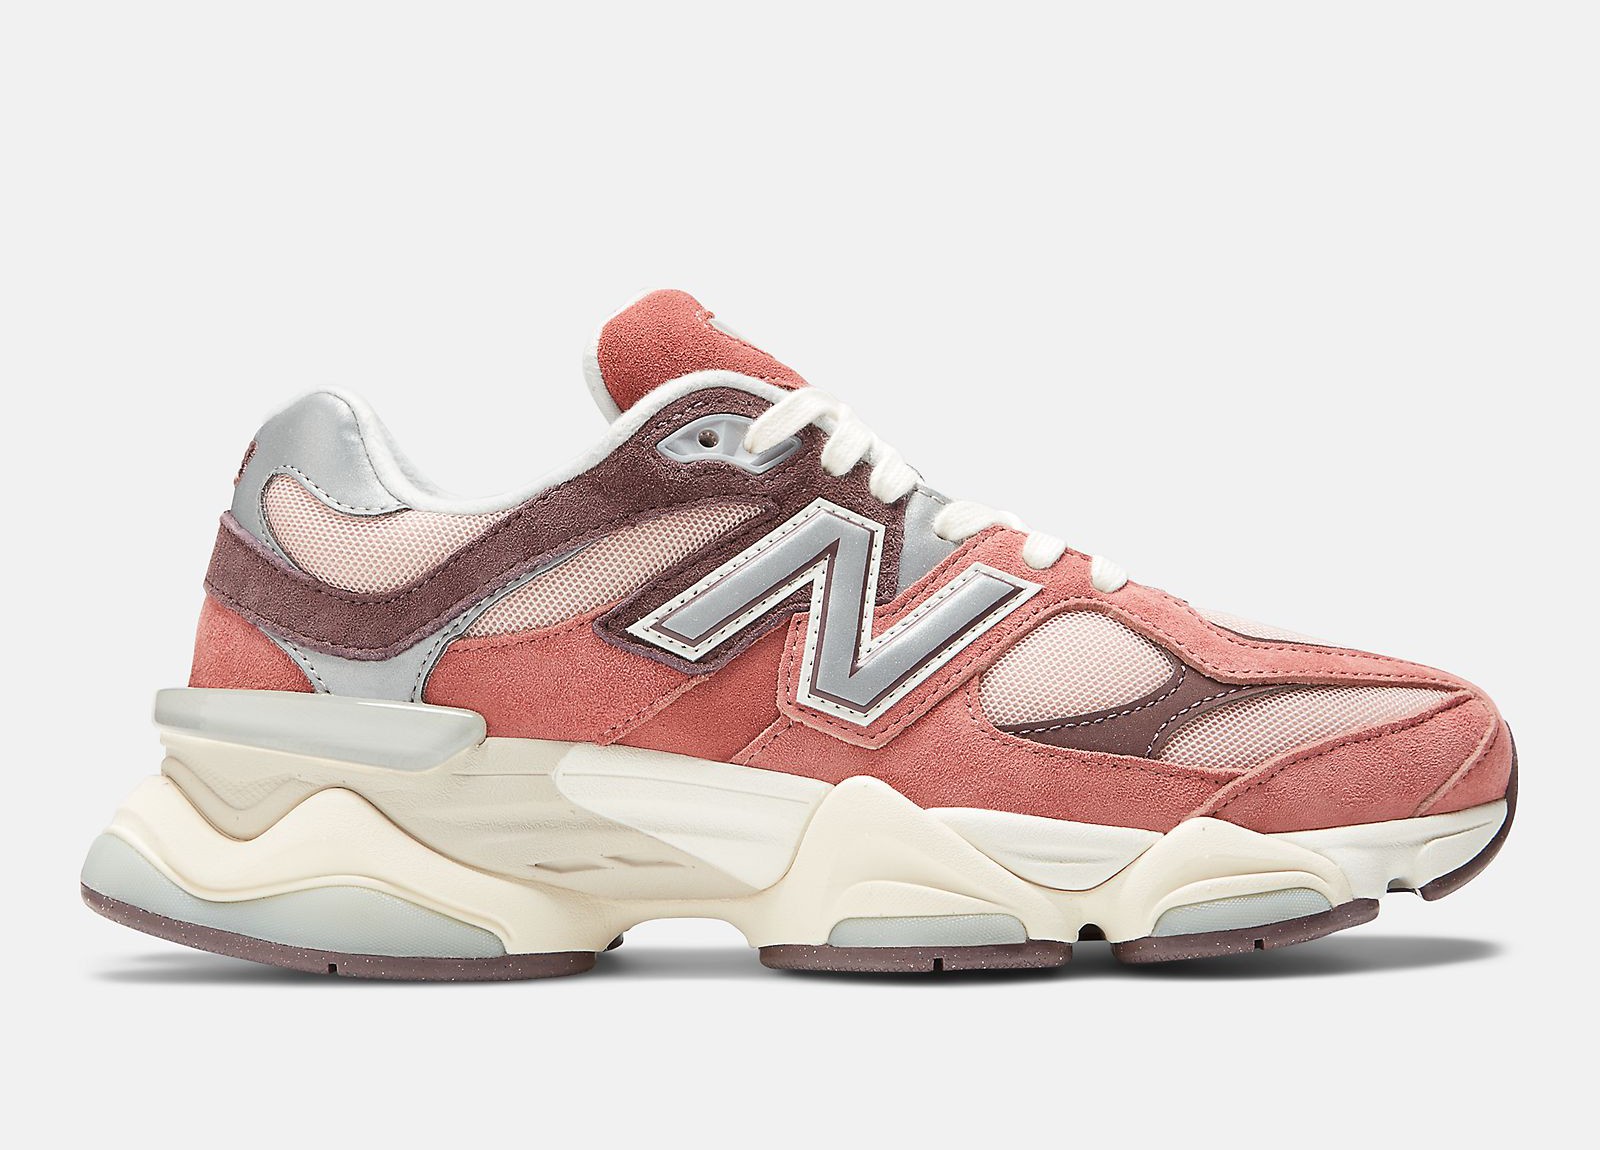 New Balance 9060
Mineral Red / Truffle